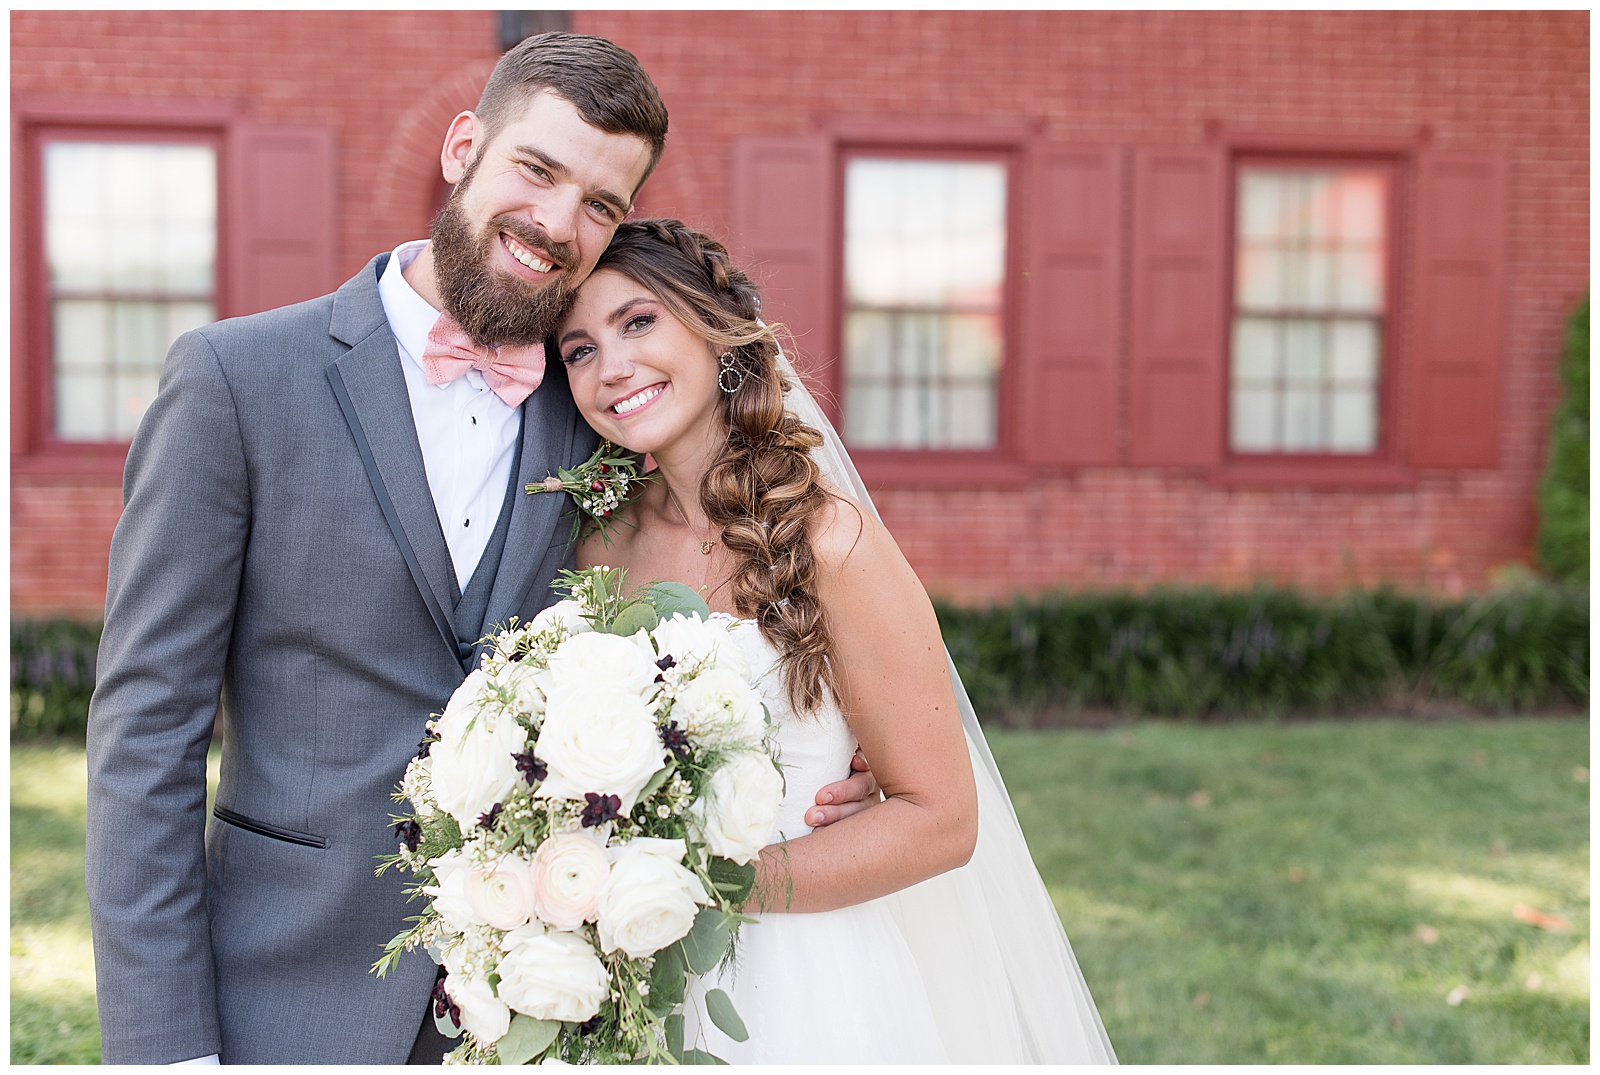 bride and groom portraits with couple smiling at camera and bride holding bouquet of white flowers